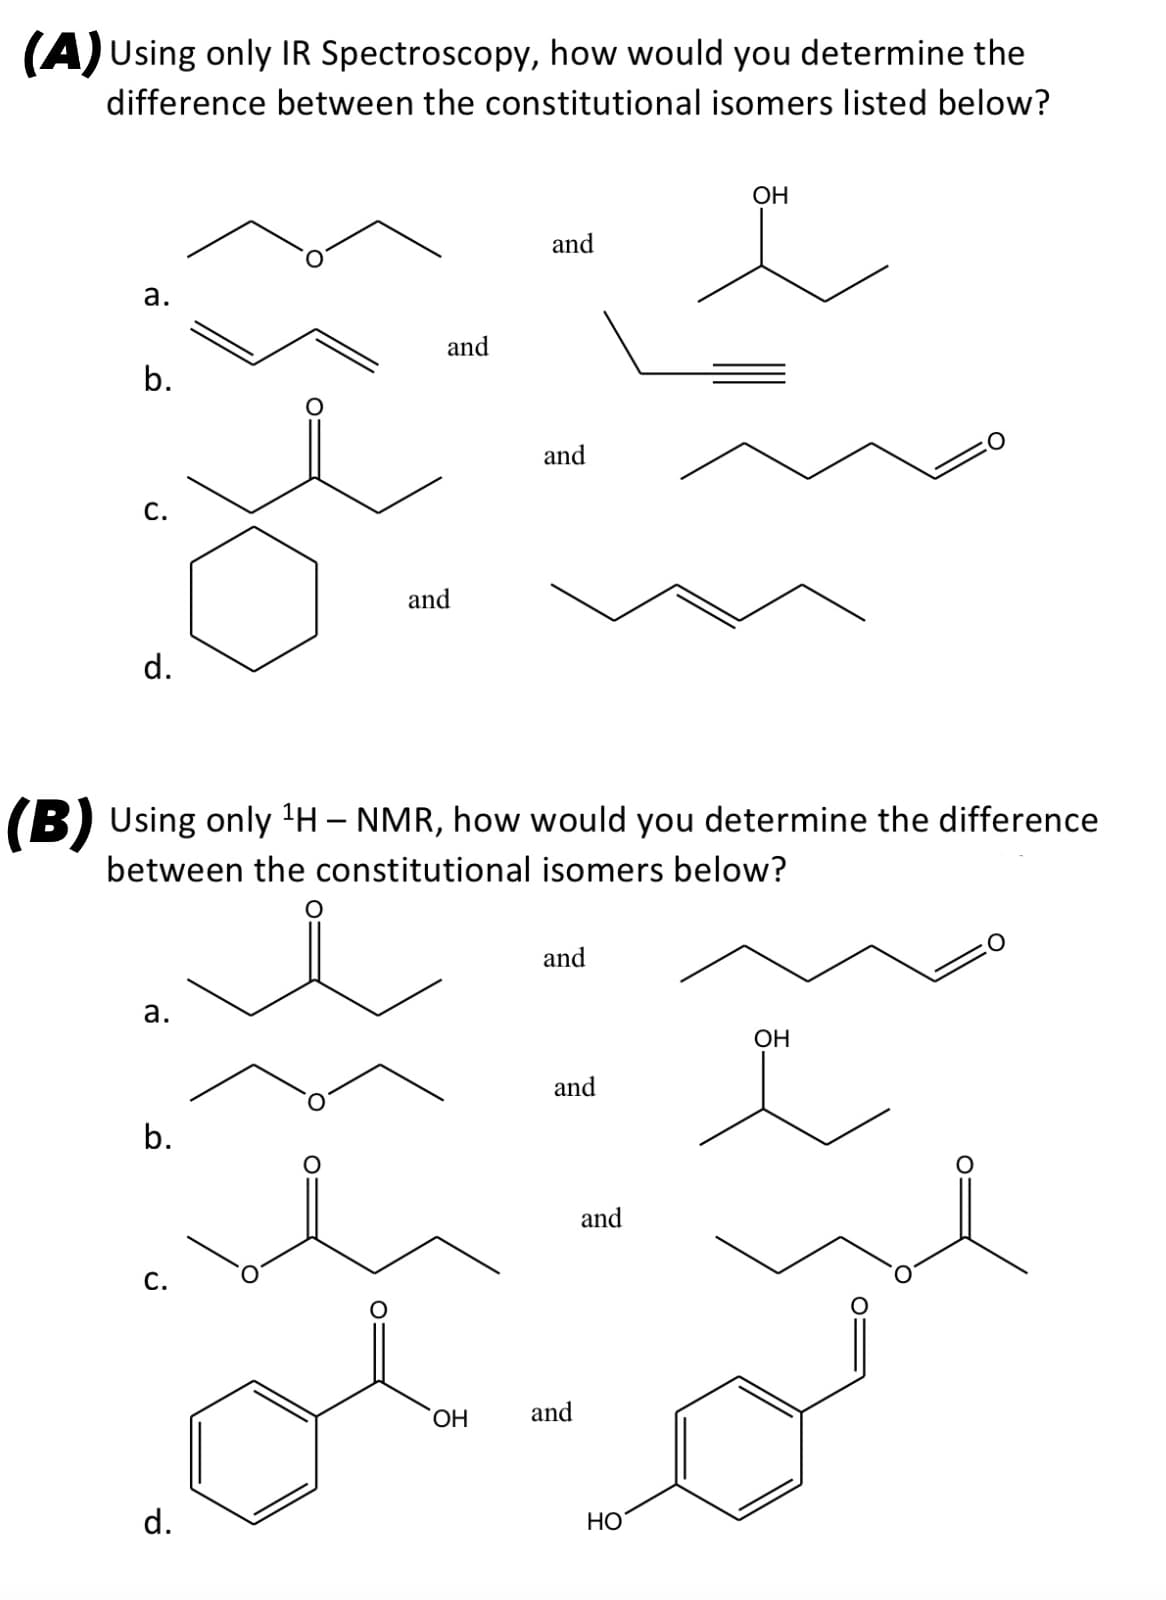 (A) Using only IR Spectroscopy, how would you determine the
difference between the constitutional isomers listed below?
a.
b.
C.
d.
a.
b.
C.
and
d.
and
(B) Using only ¹H - NMR, how would you determine the difference
between the constitutional isomers below?
OH
and
شما
and
and
and
and
and
OH
HO
OH